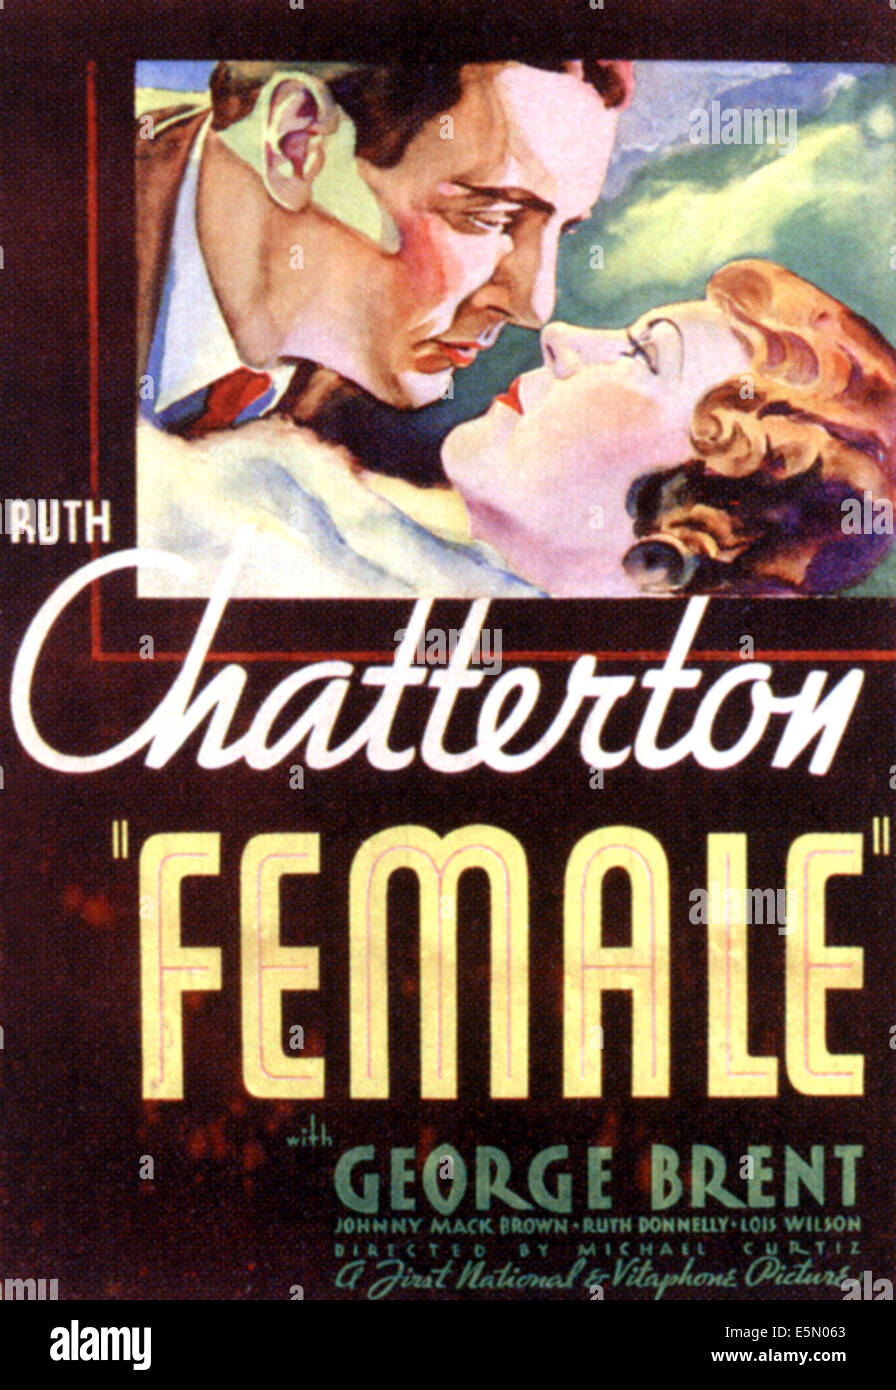 Femme, George Brent, Ruth Chatterton, 1933 Banque D'Images